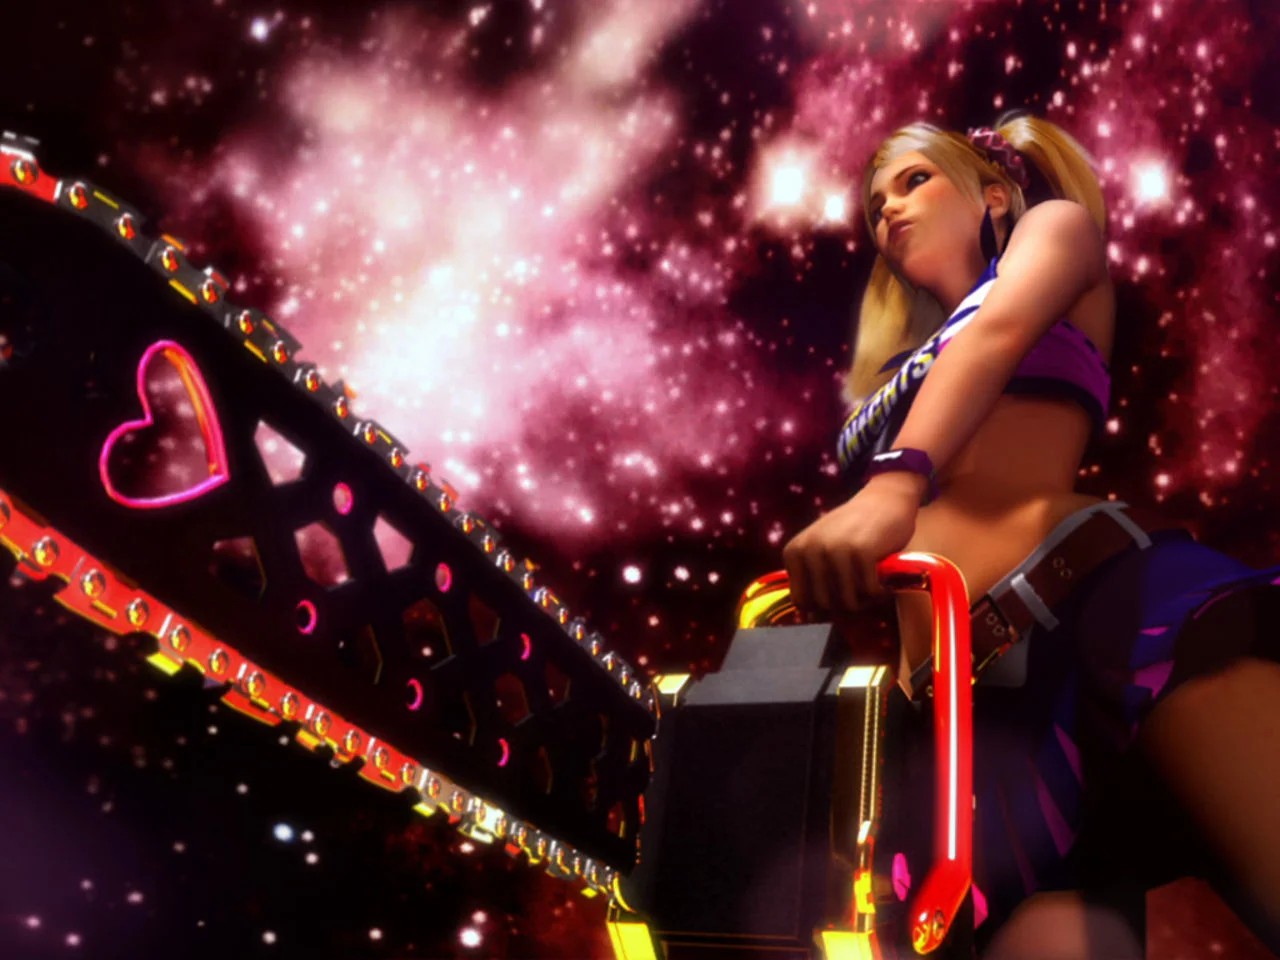 Lollipop Chainsaw - Swan Trailer - High quality stream and download -  Gamersyde